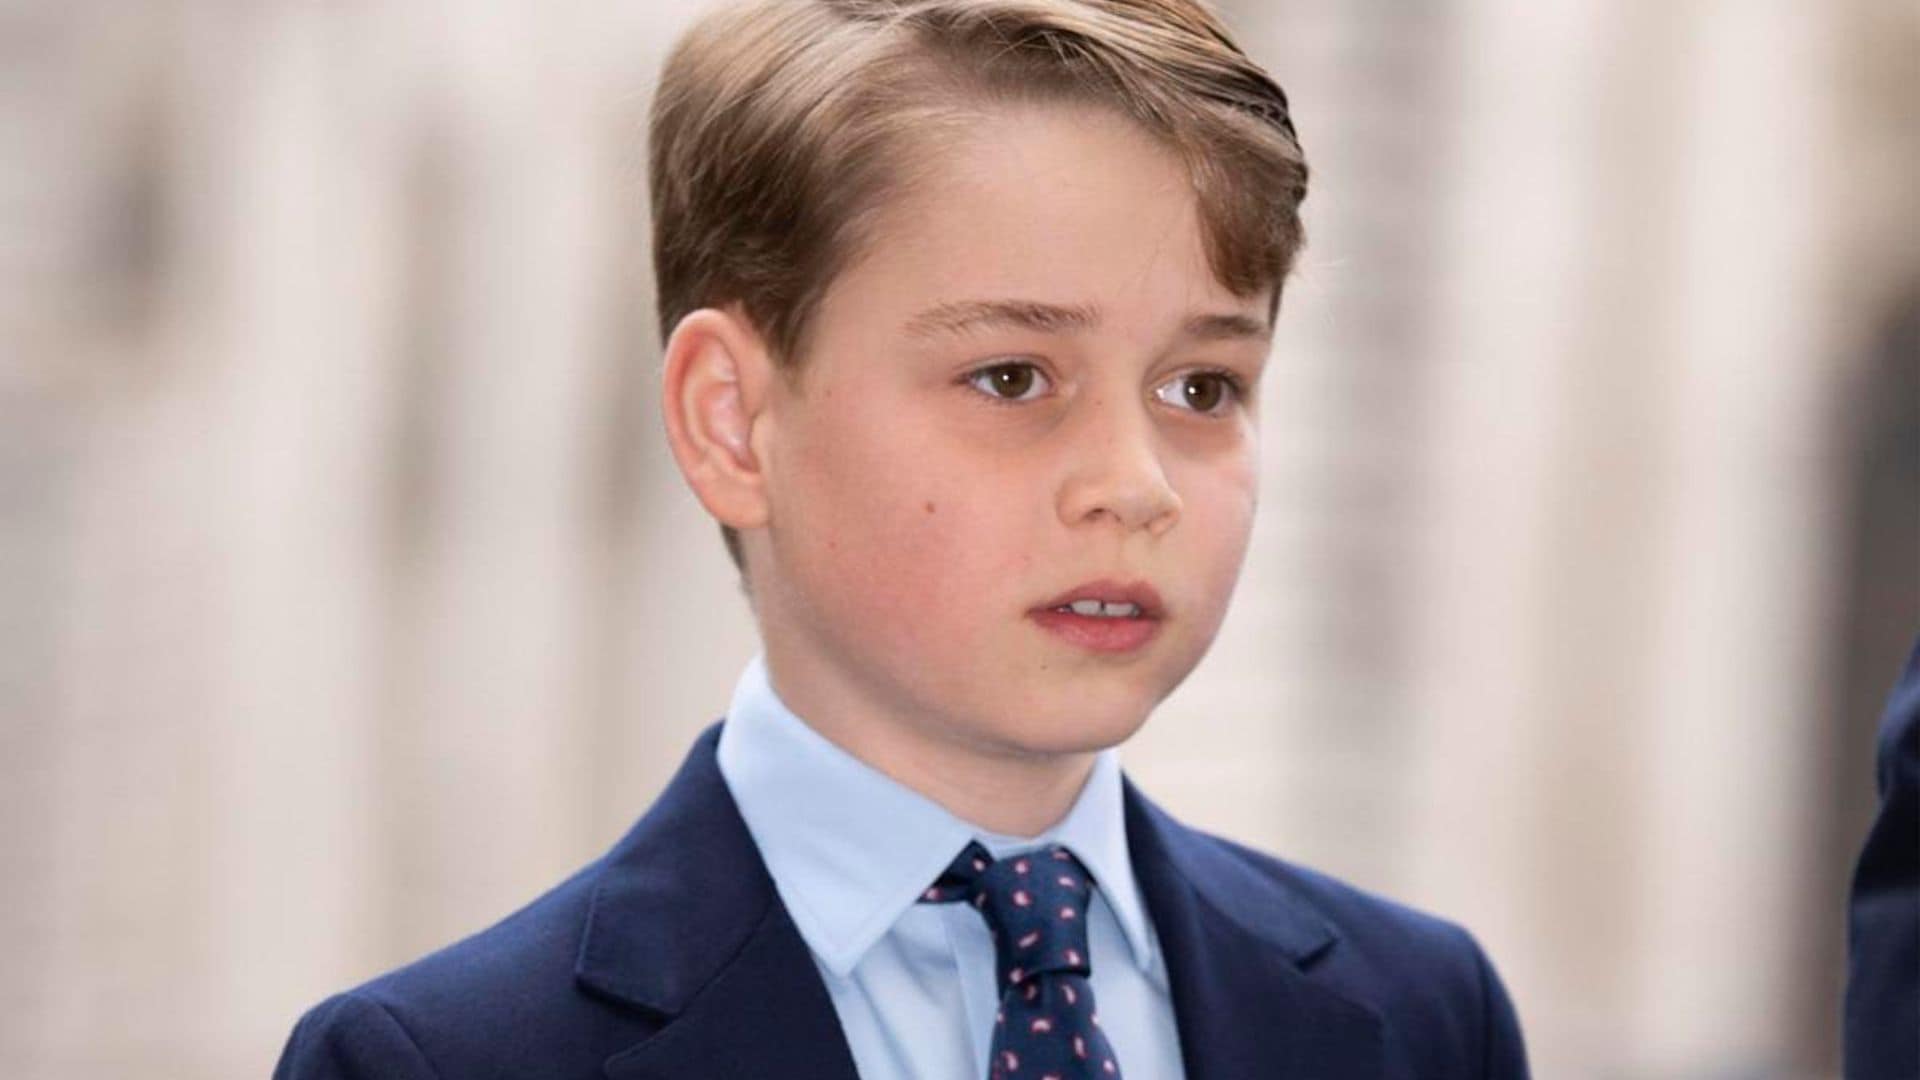 Is Prince George switching schools?